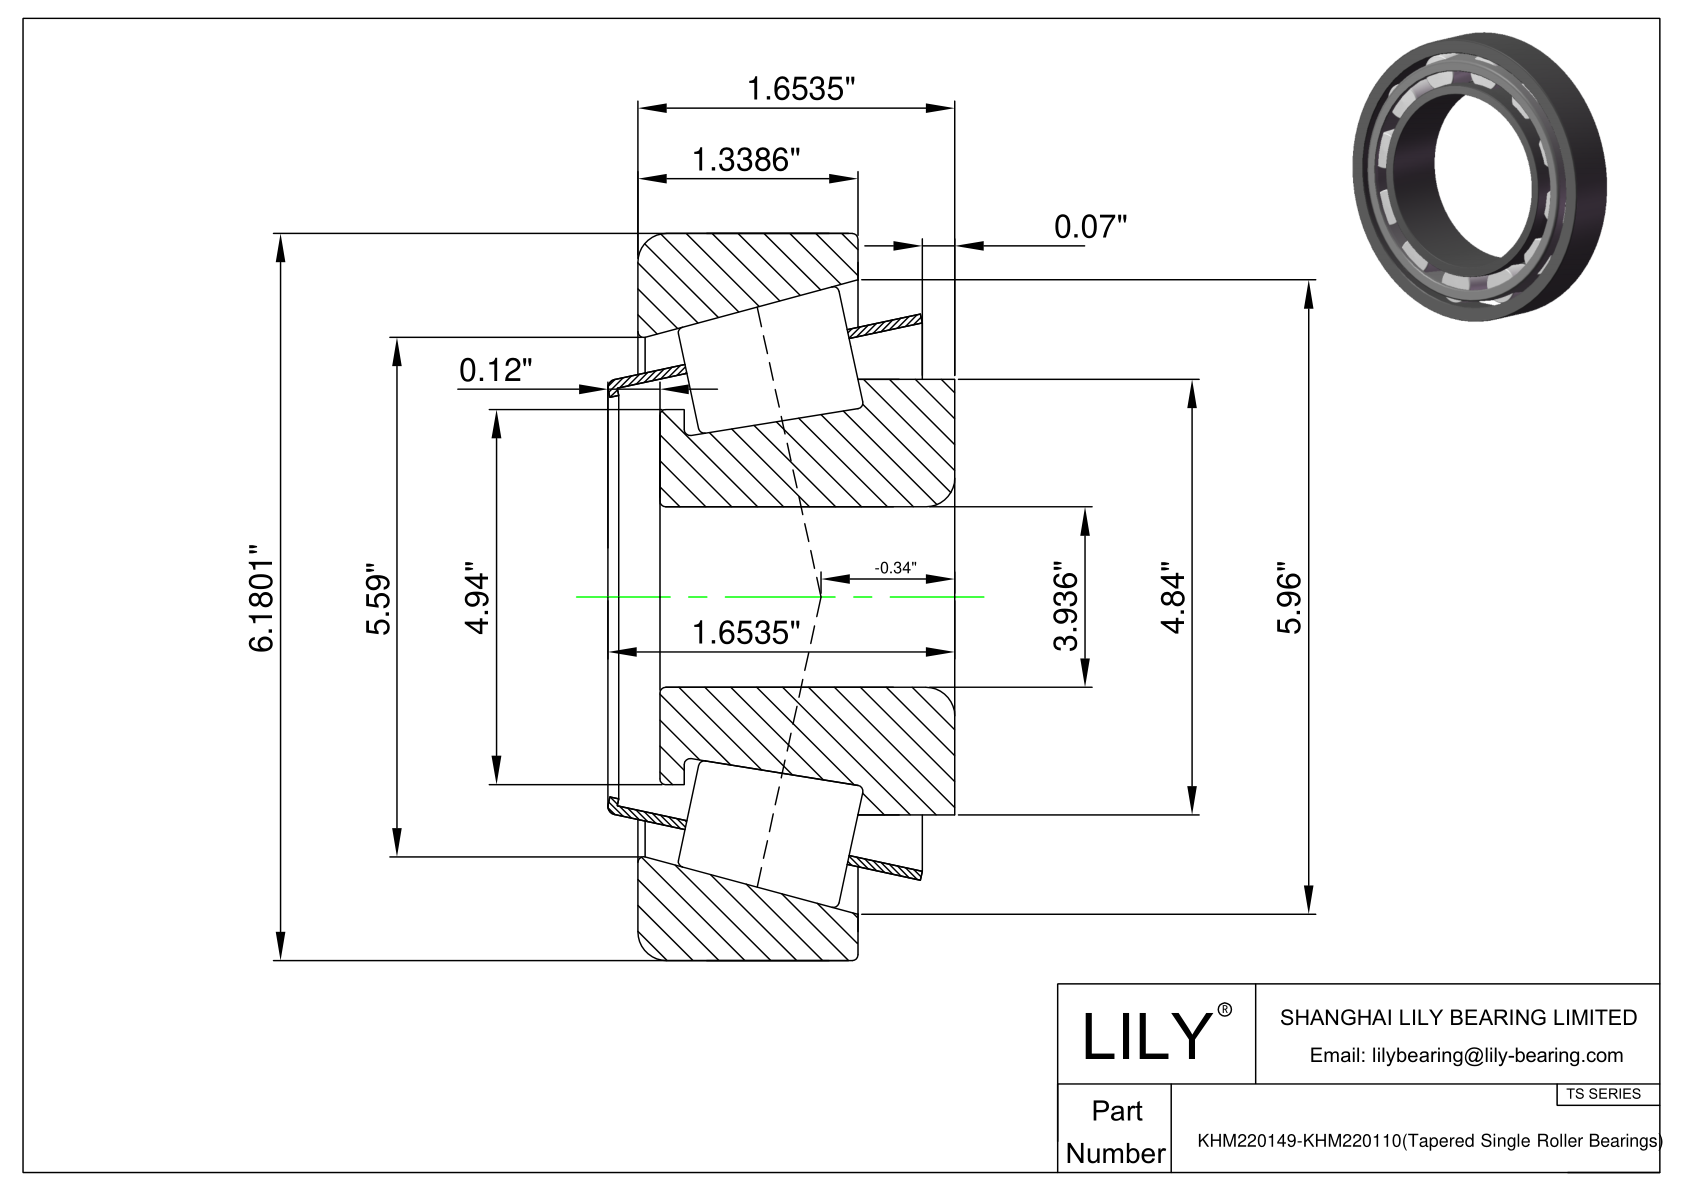 KHM220149-KHM220110 TS (Tapered Single Roller Bearings) (Imperial) cad drawing